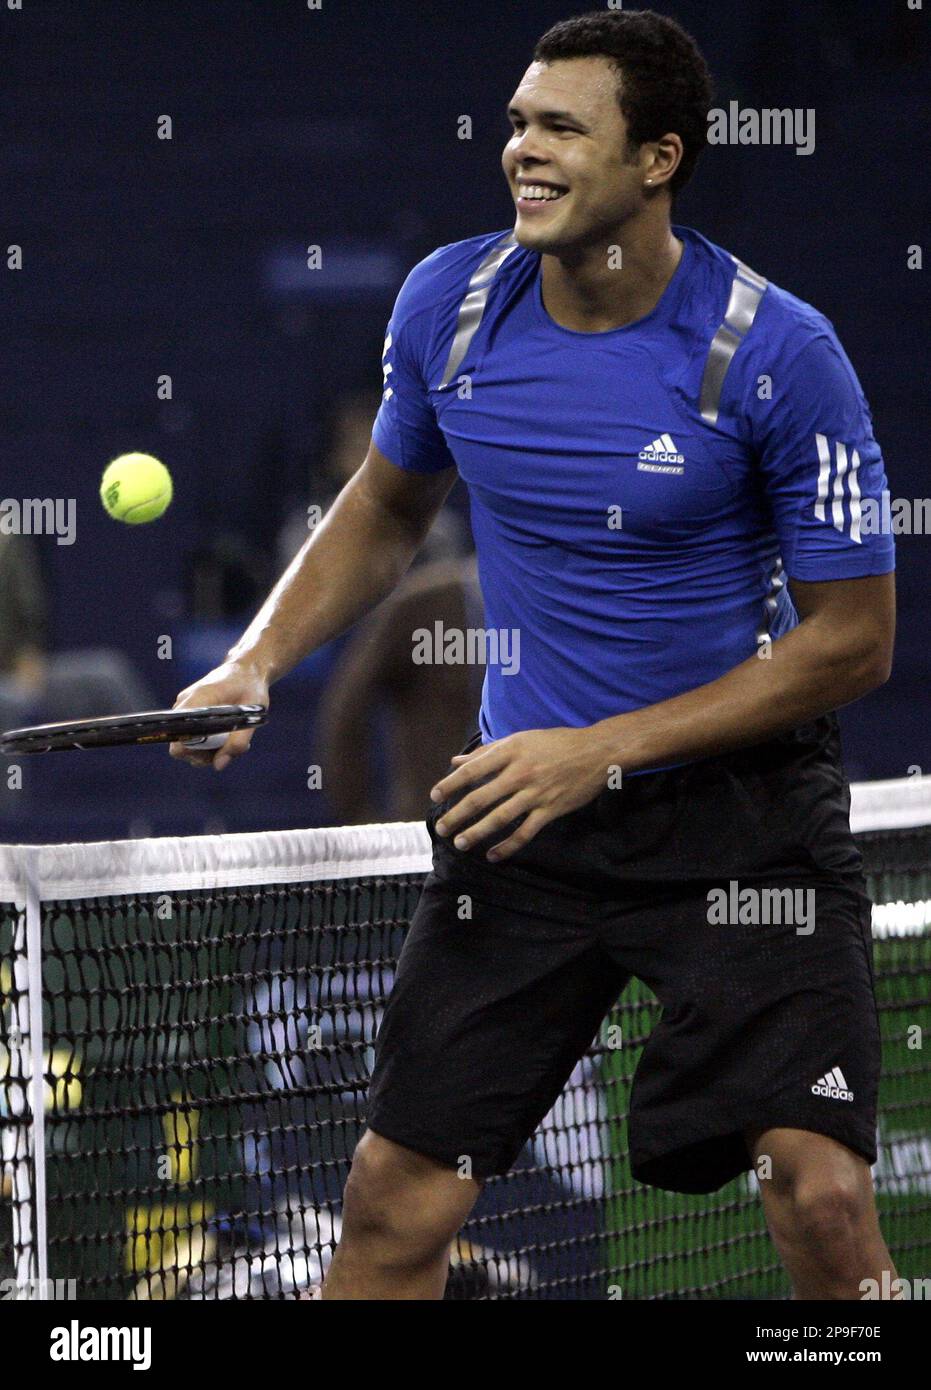 French tennis player Jo-Wilfried Tsonga smiles after failing to return a  shot to Briton Andy Murray during practice for the upcoming Tennis Masters  Cup in Shanghai, China Friday Nov.7, 2008. (AP Photo/Bullit